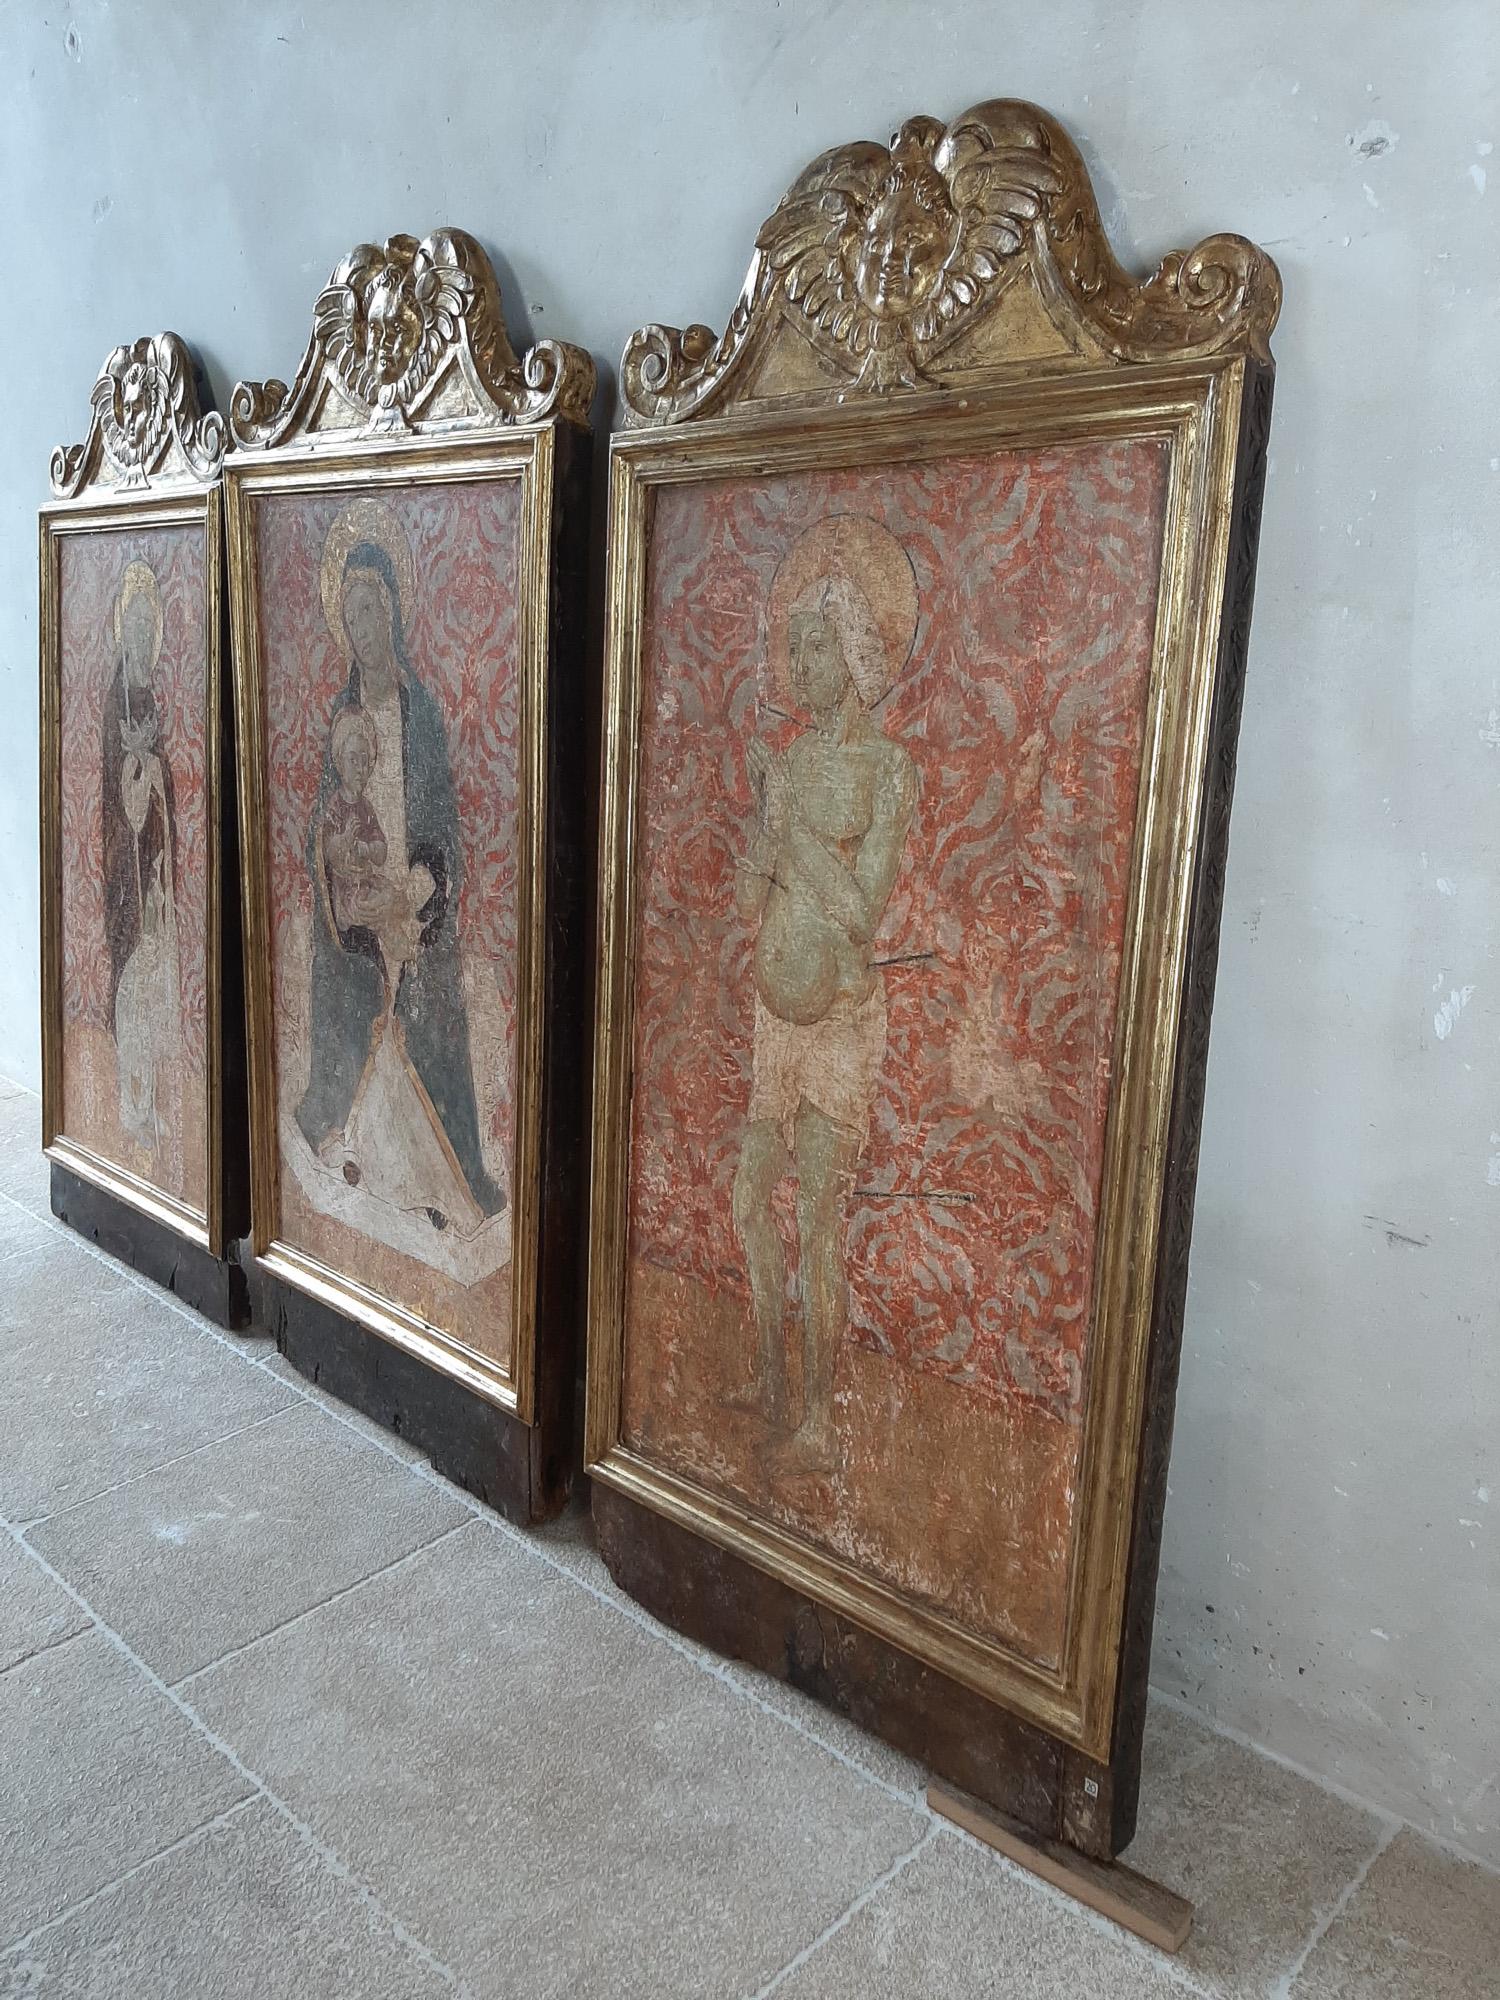 Triptych with Fresco on Walnut from the 14th to 15th Century, Siena, Italy 10